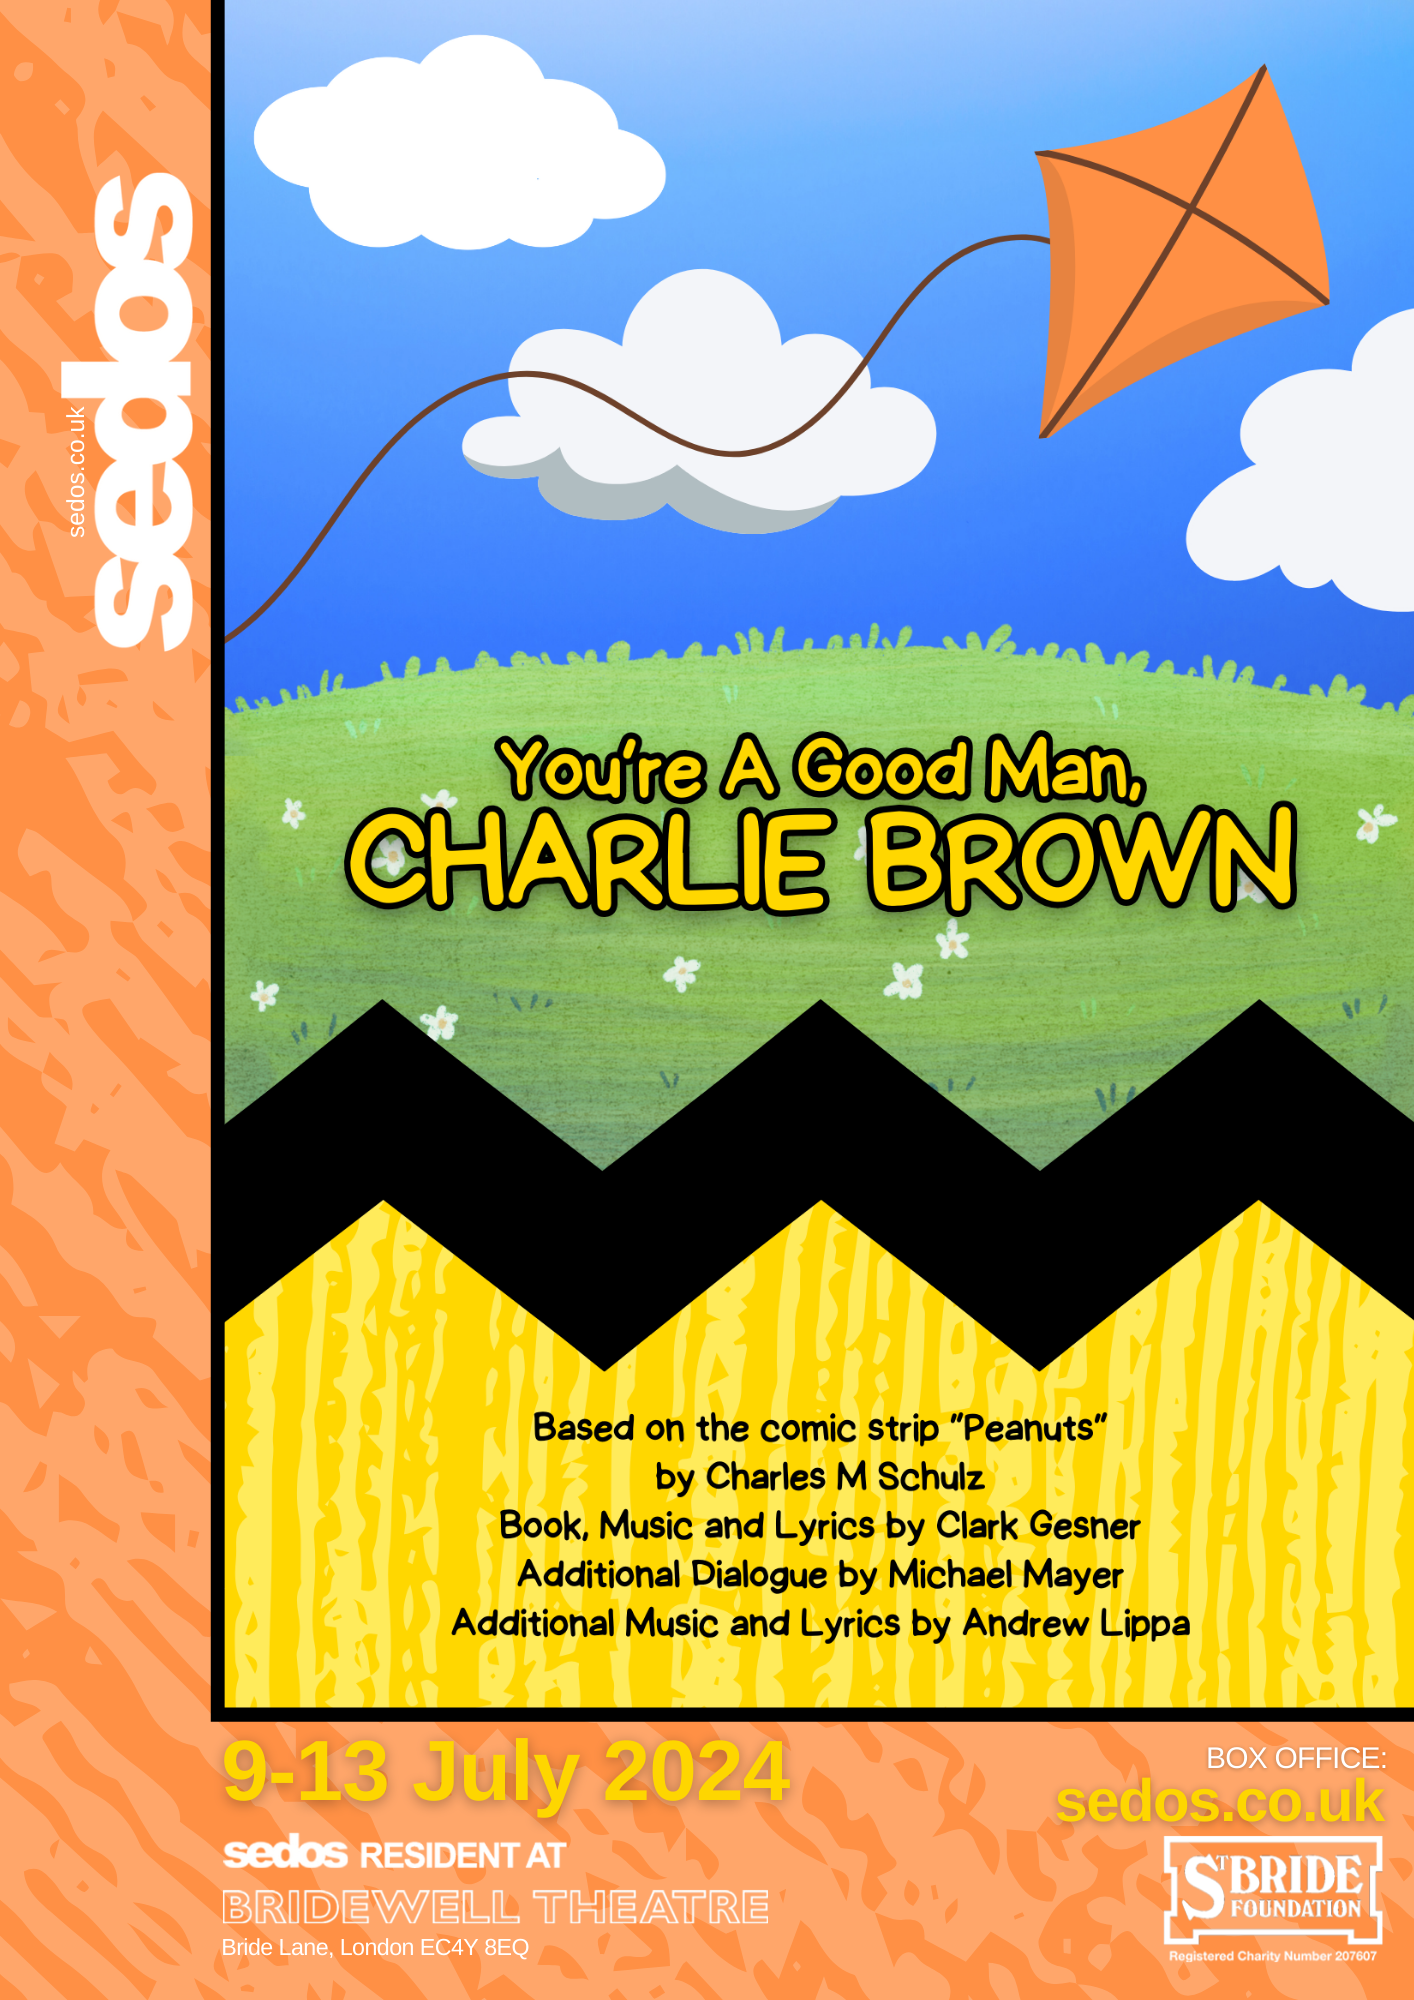 You’re A Good Man, Charlie Brown flyer image